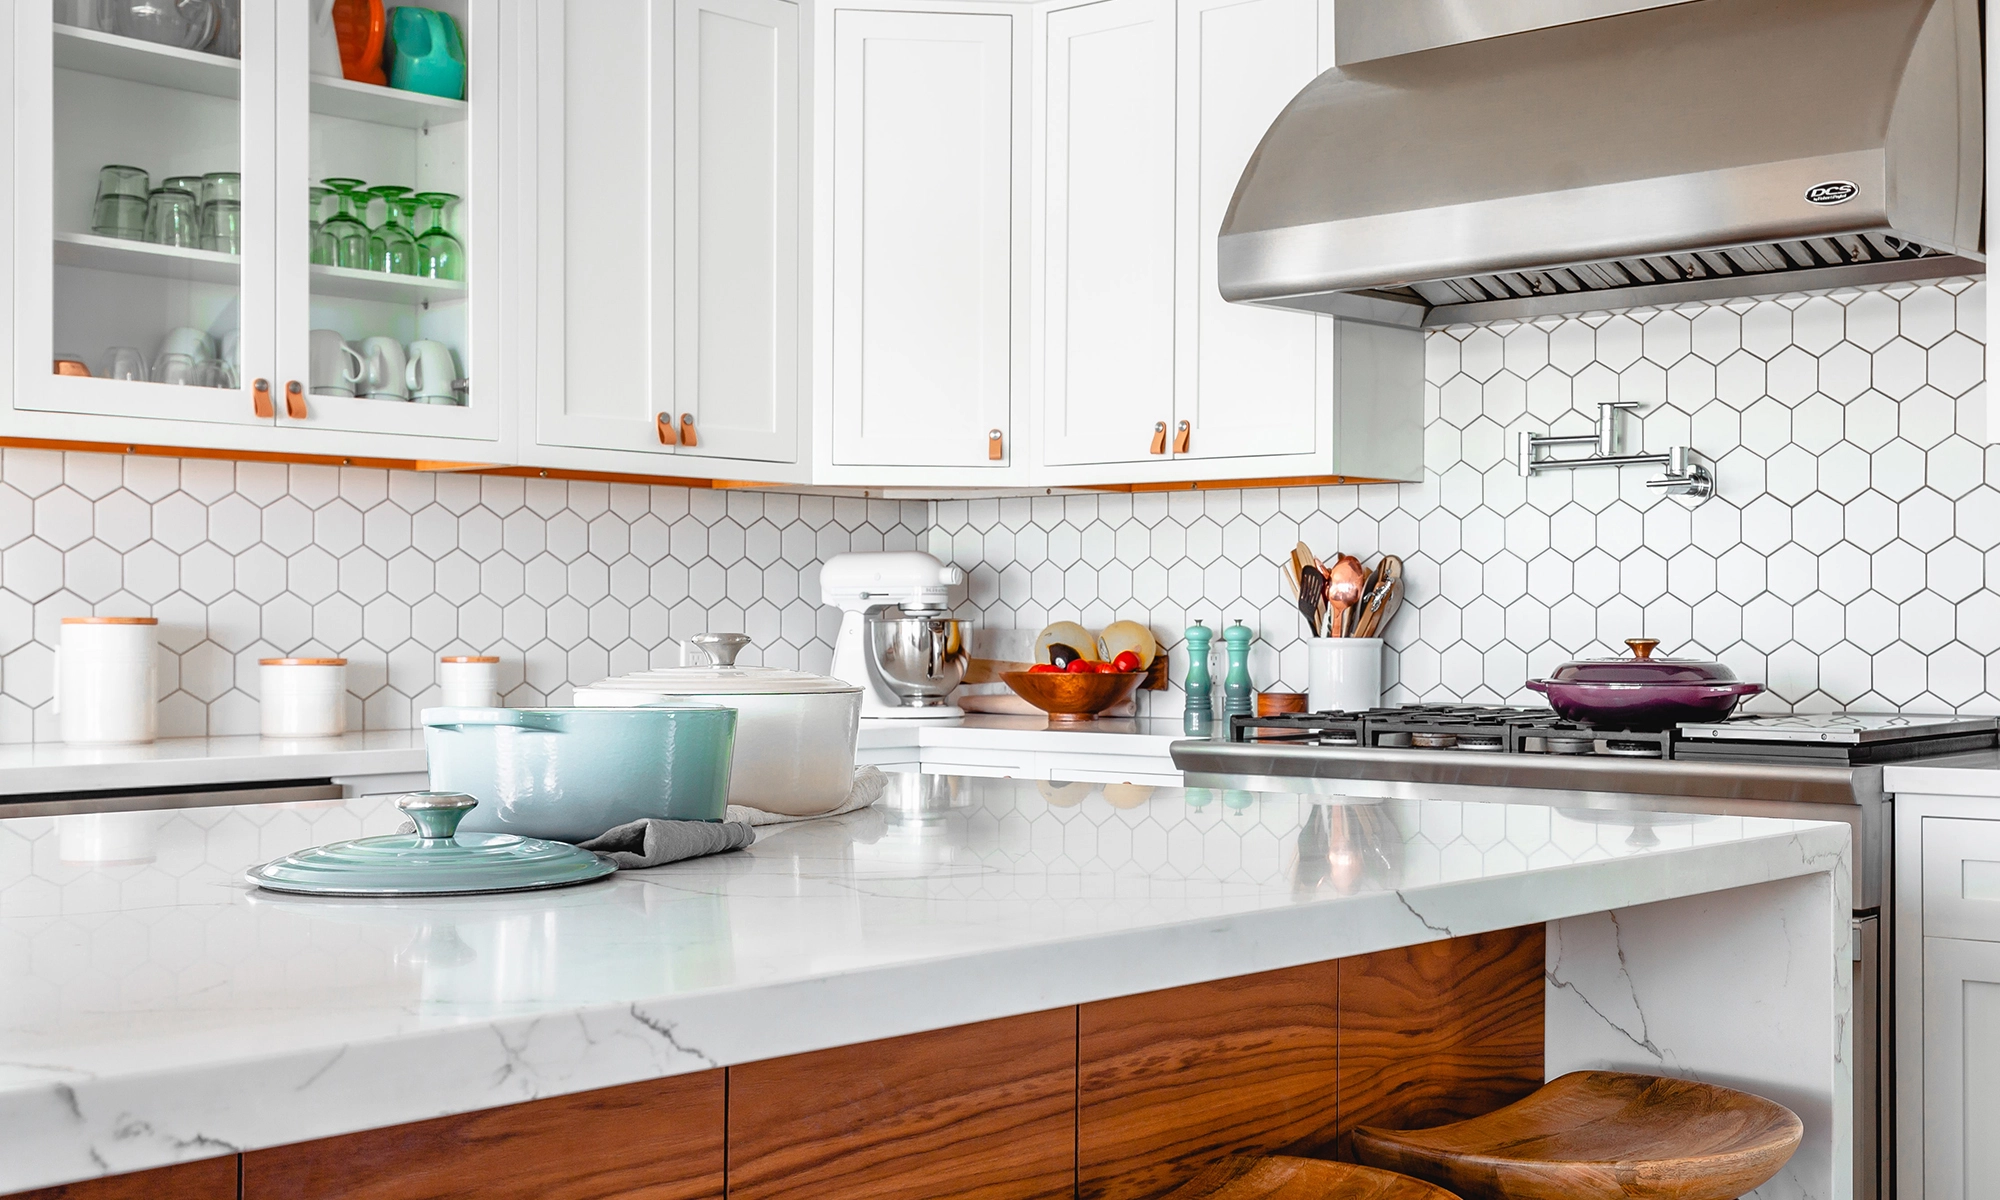 Considerations for Choosing the Right Stain Removal Product for Kitchen Countertops